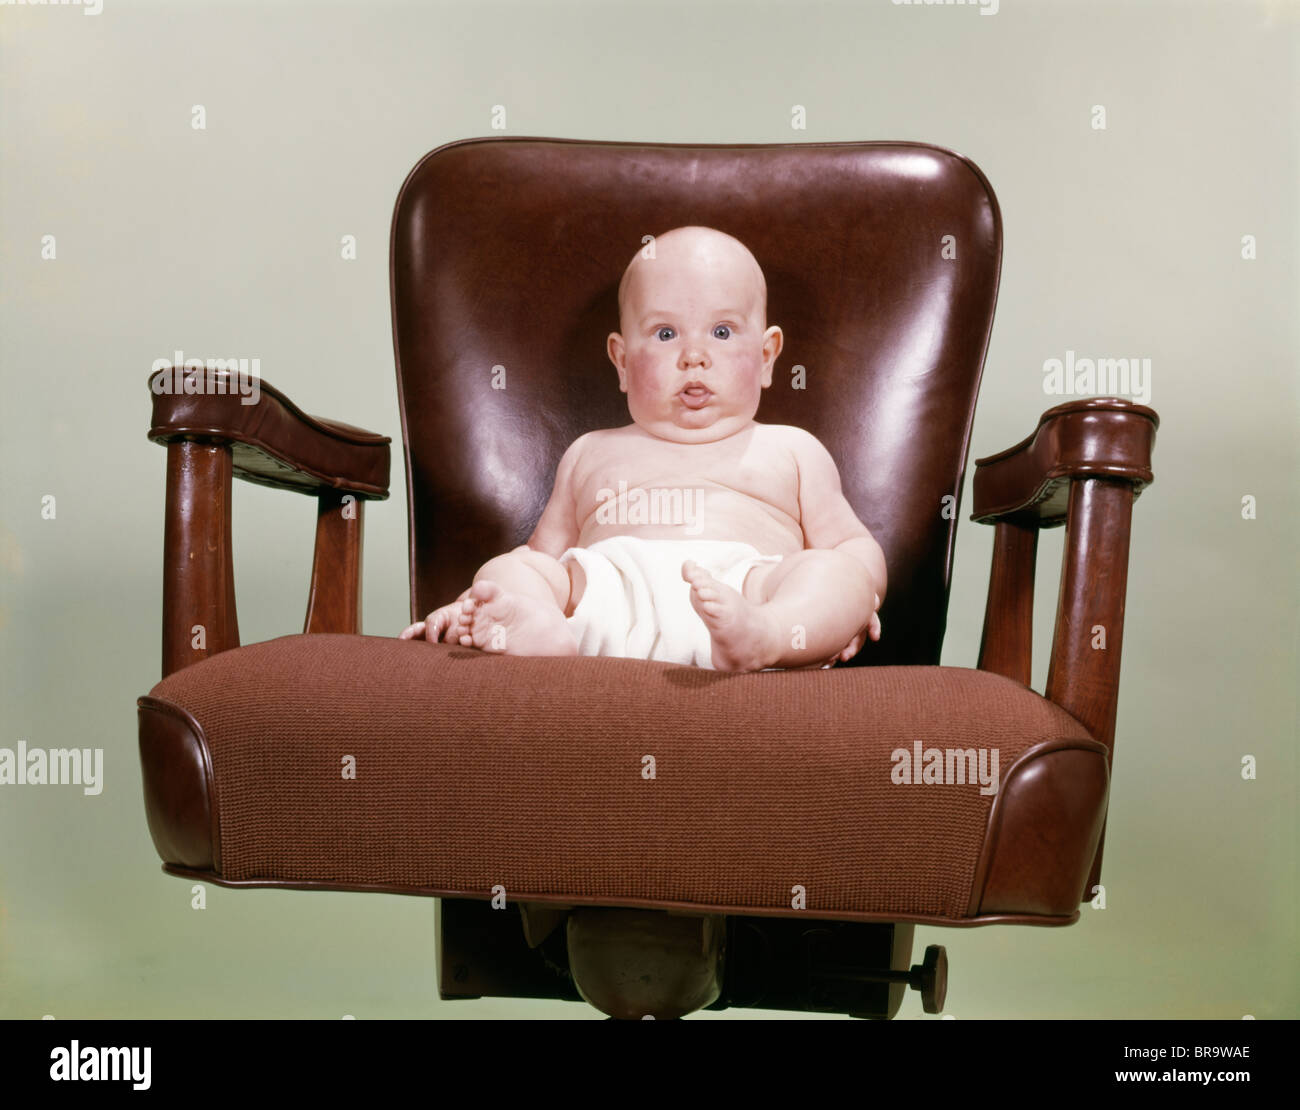 1960s CHUBBY BALD BABY WEARING CLOTH DIAPER SITTING IN EXECUTIVE OFFICE BUSINESS CHAIR Stock Photo